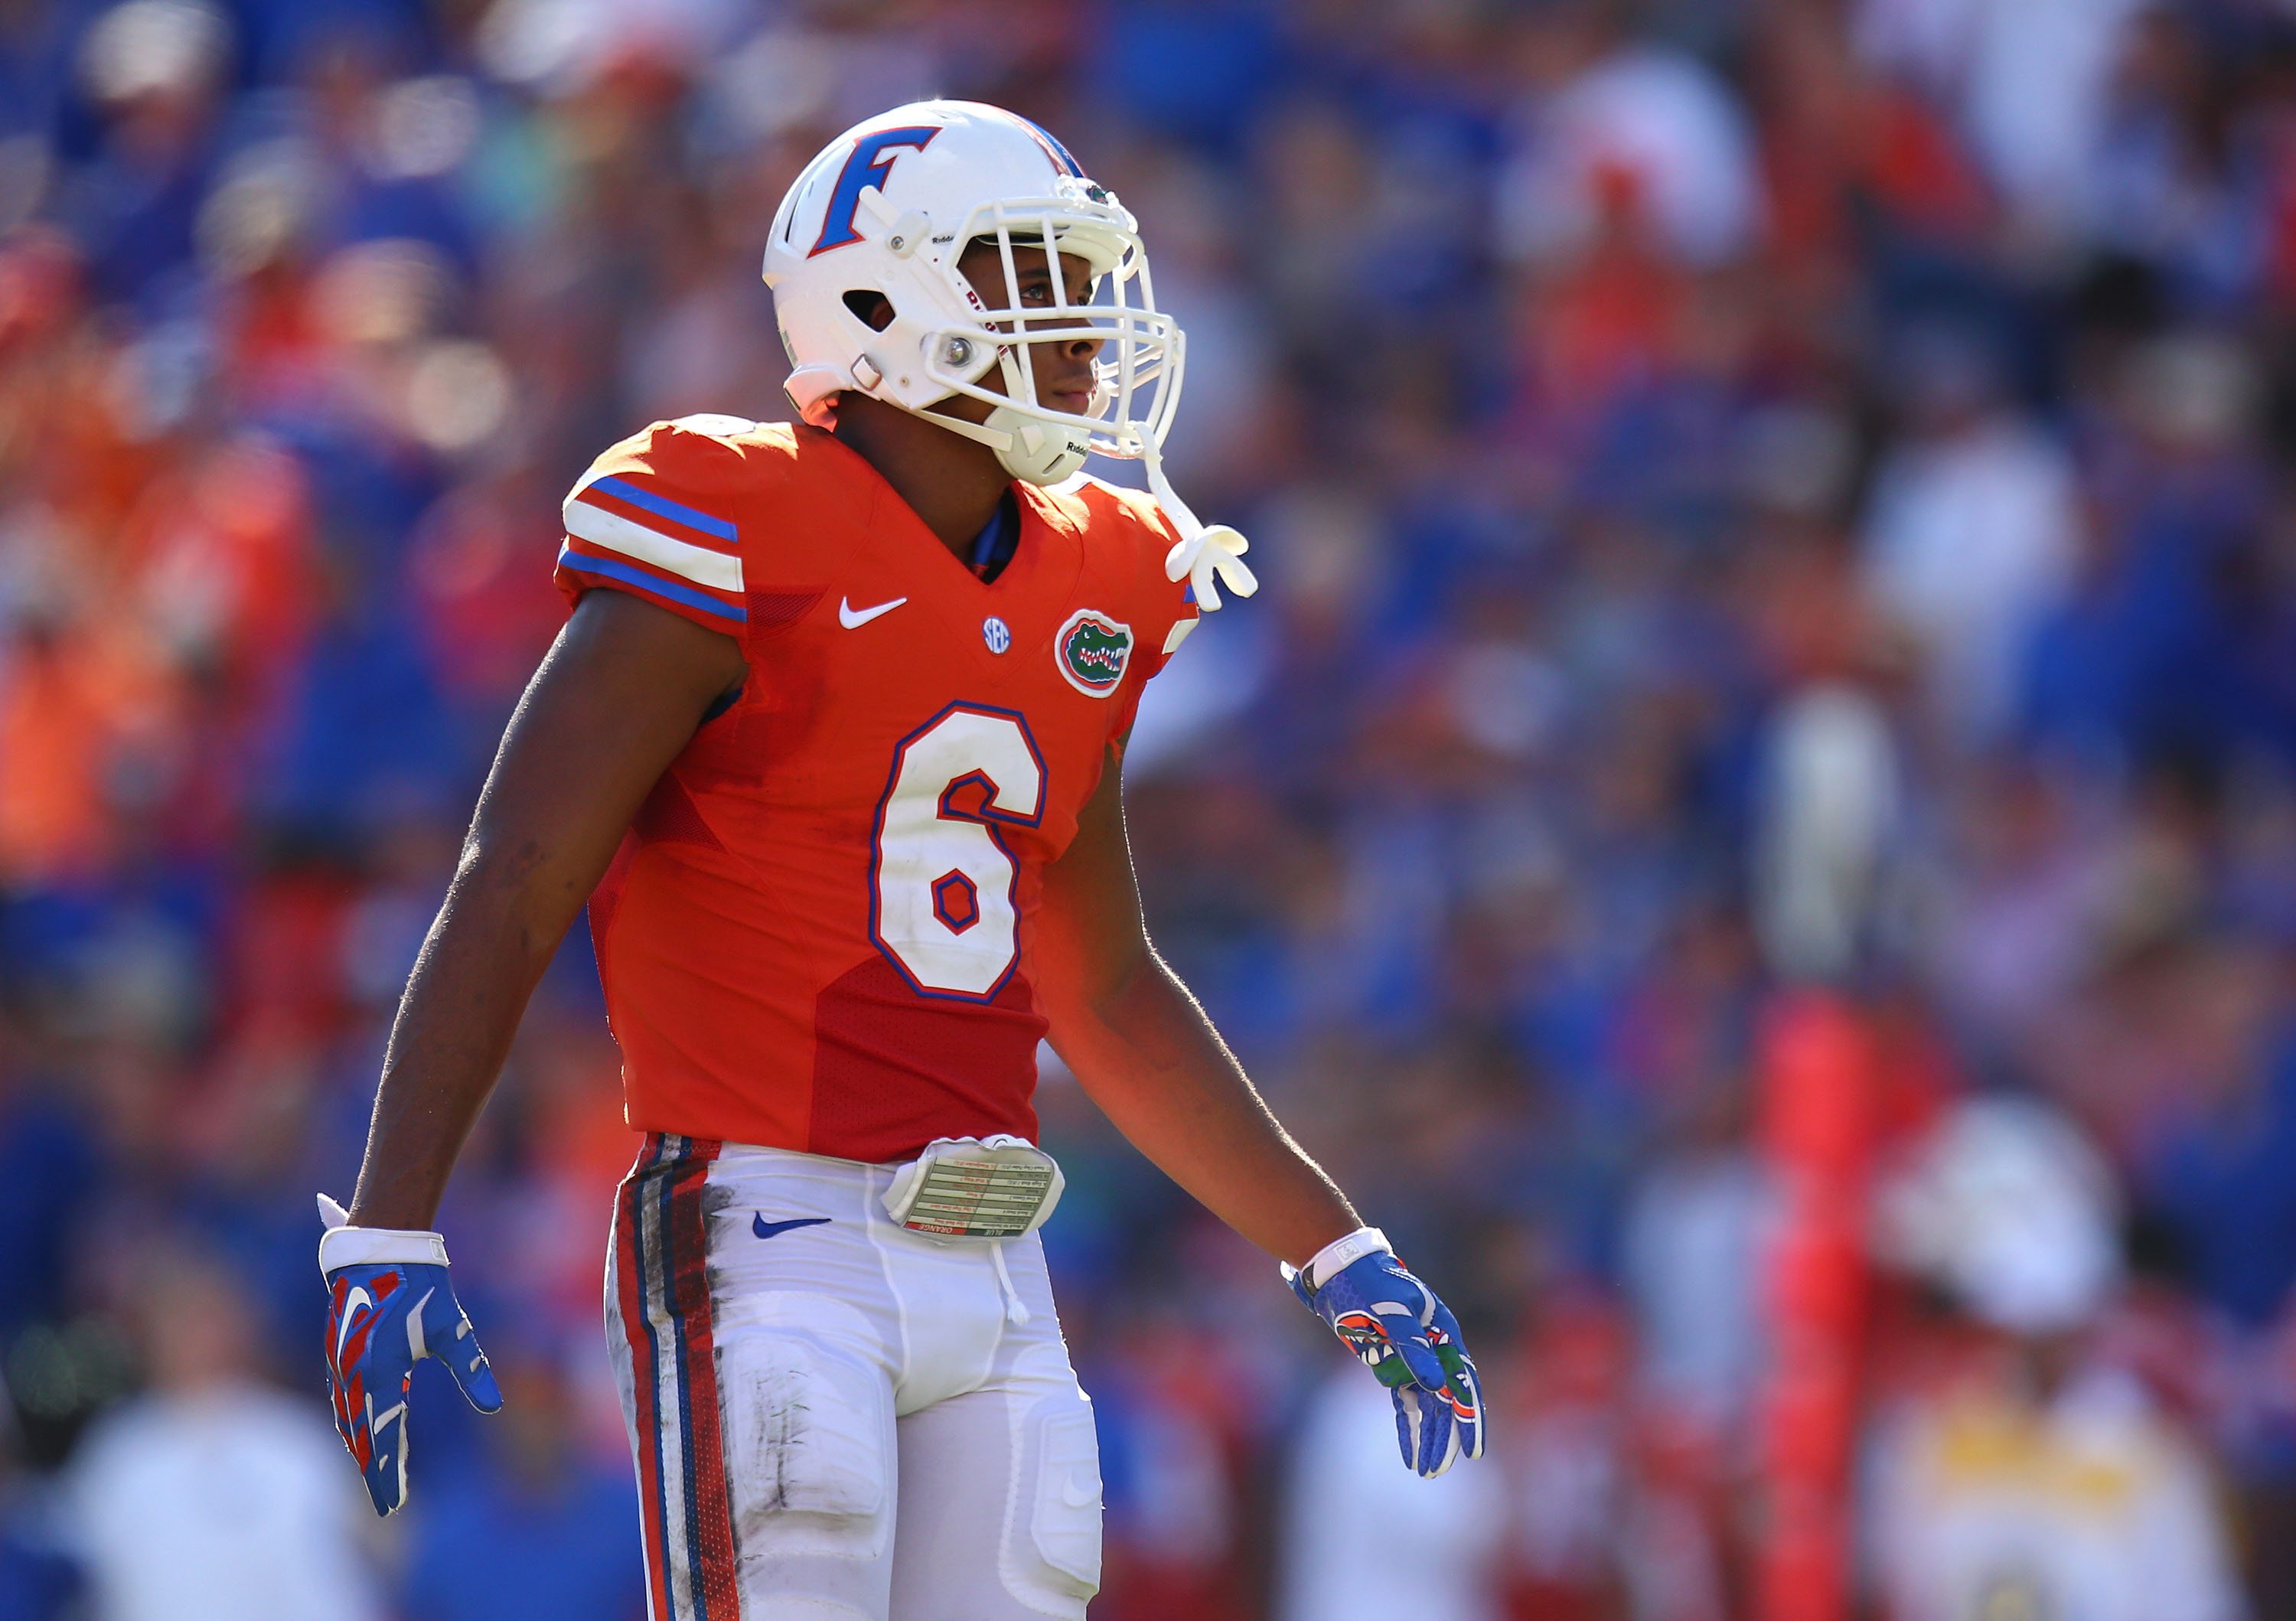 2017 NFL Draft: Scouting Florida CB Quincy Wilson